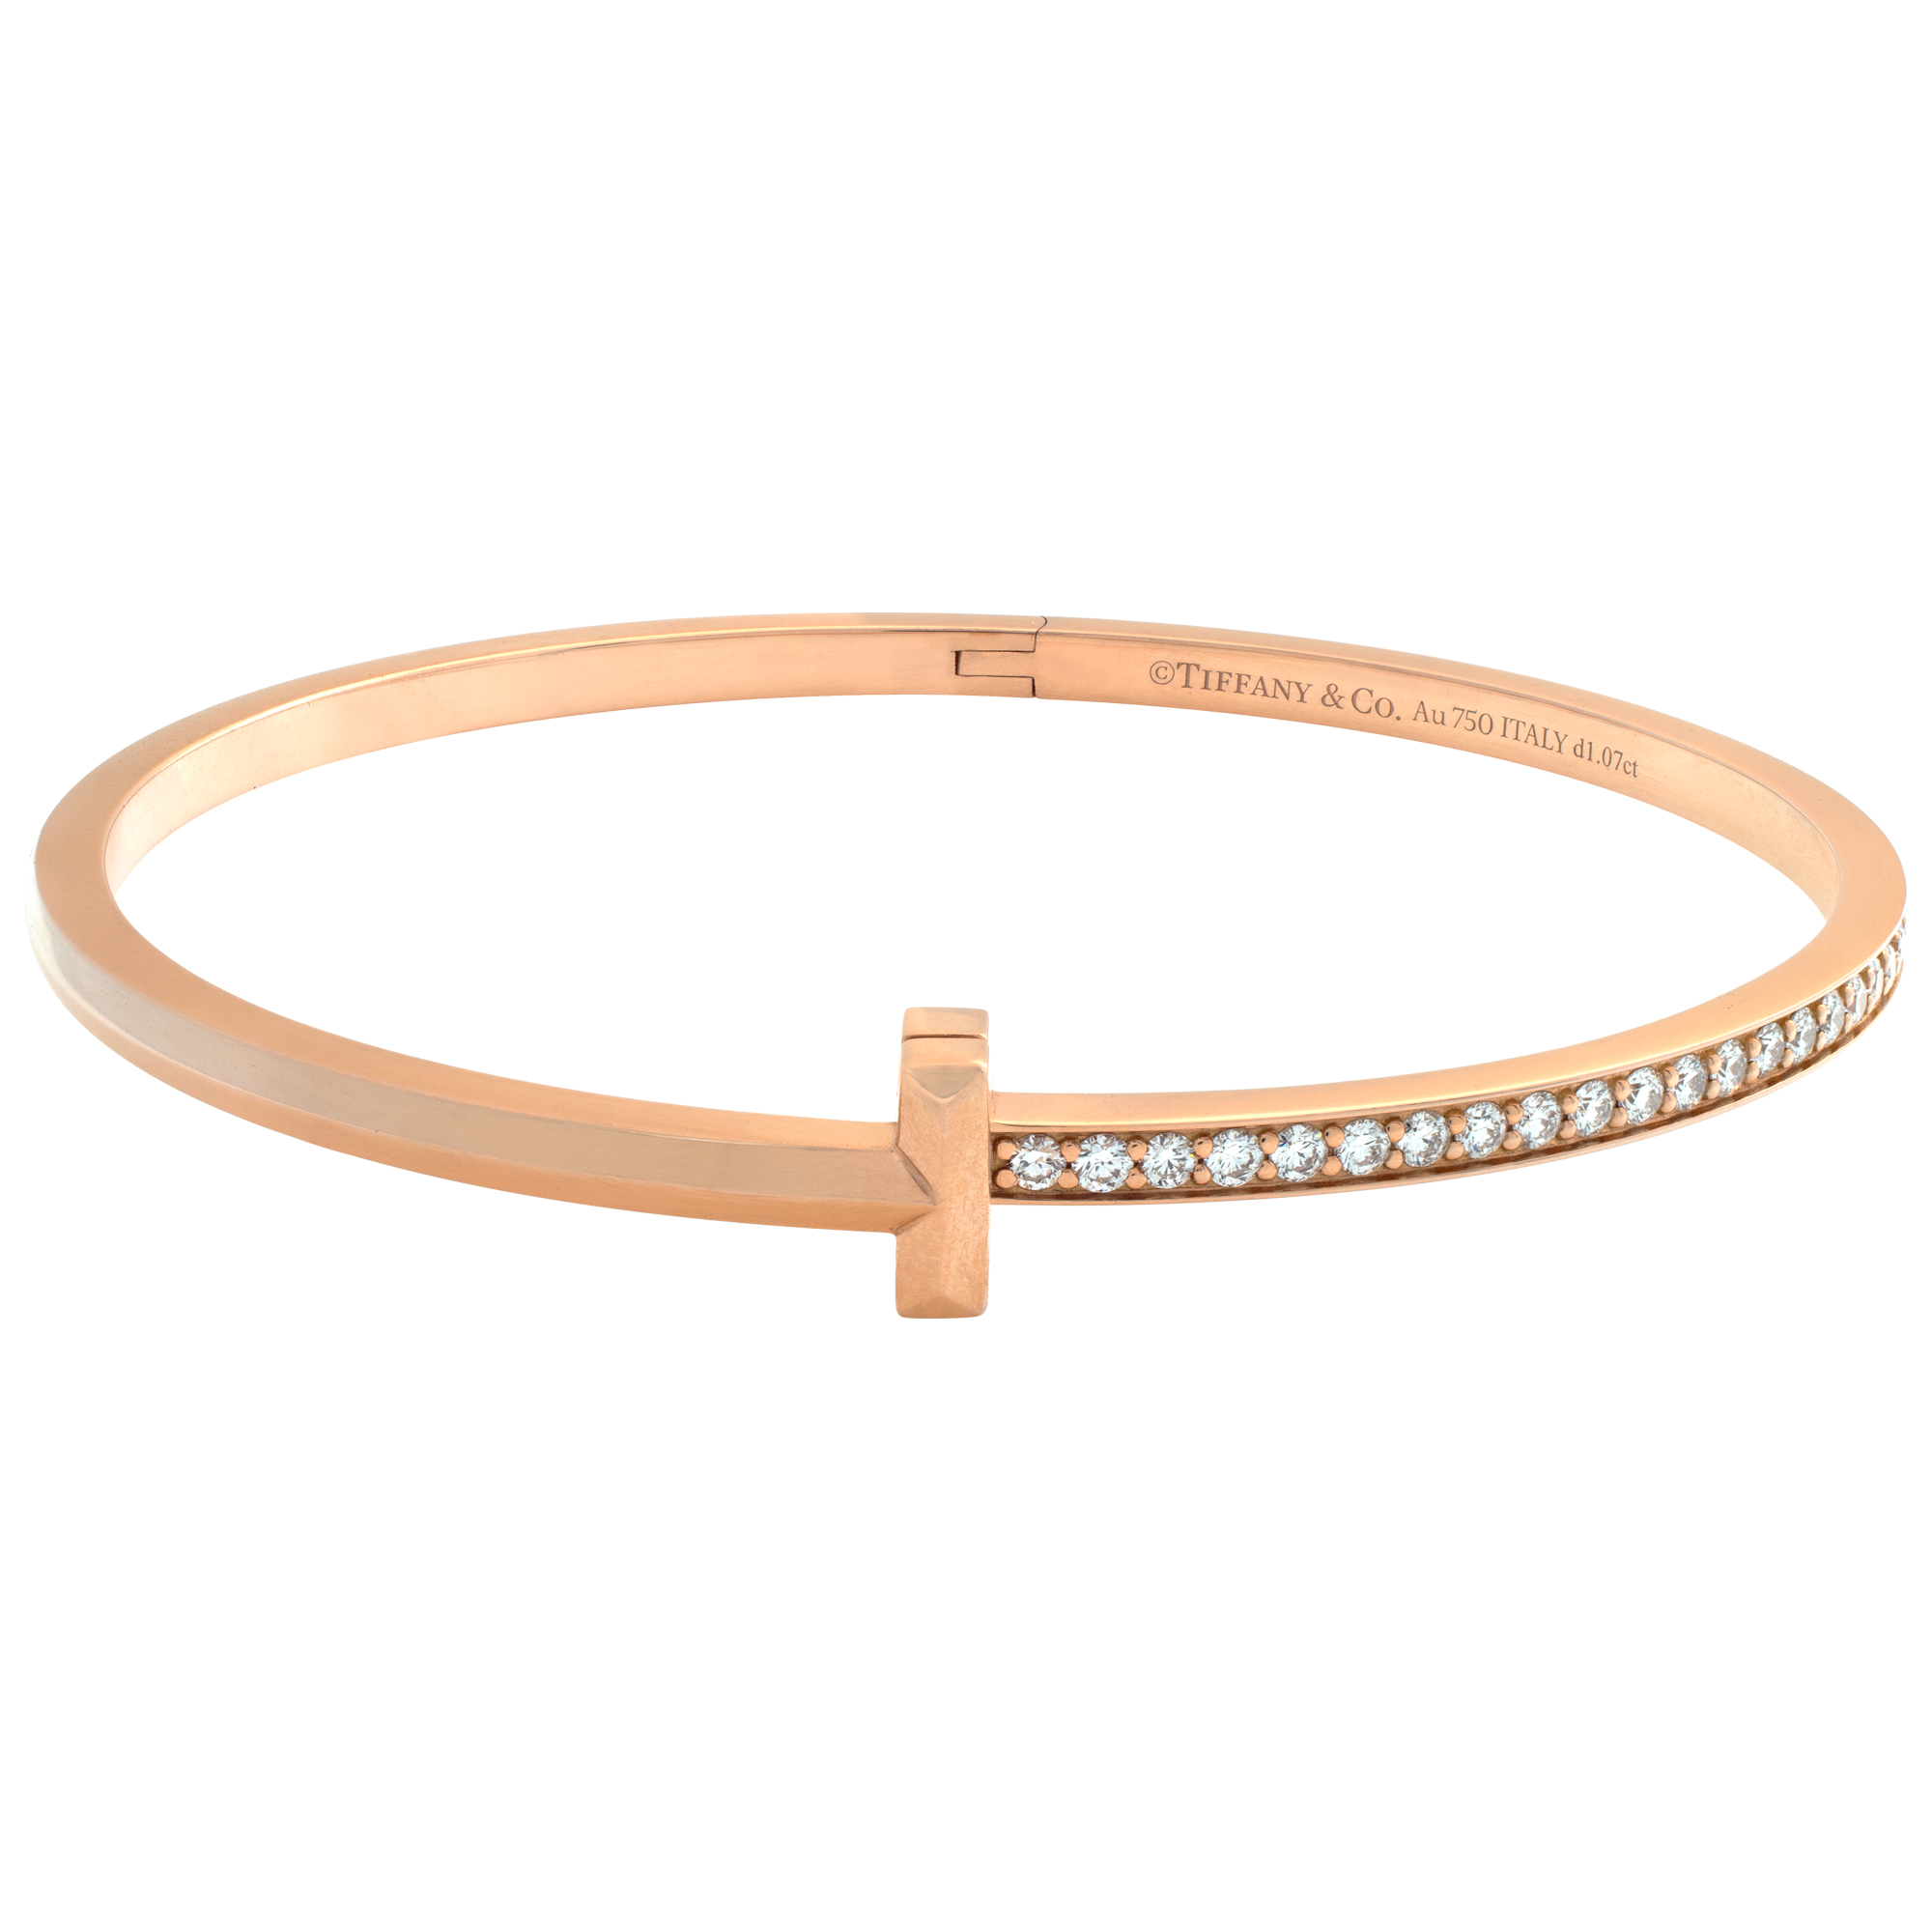 Tiffany & Co T1 T collection, hinged bangle in 18k rose gold with 1.07 carat round brilliant diamonds